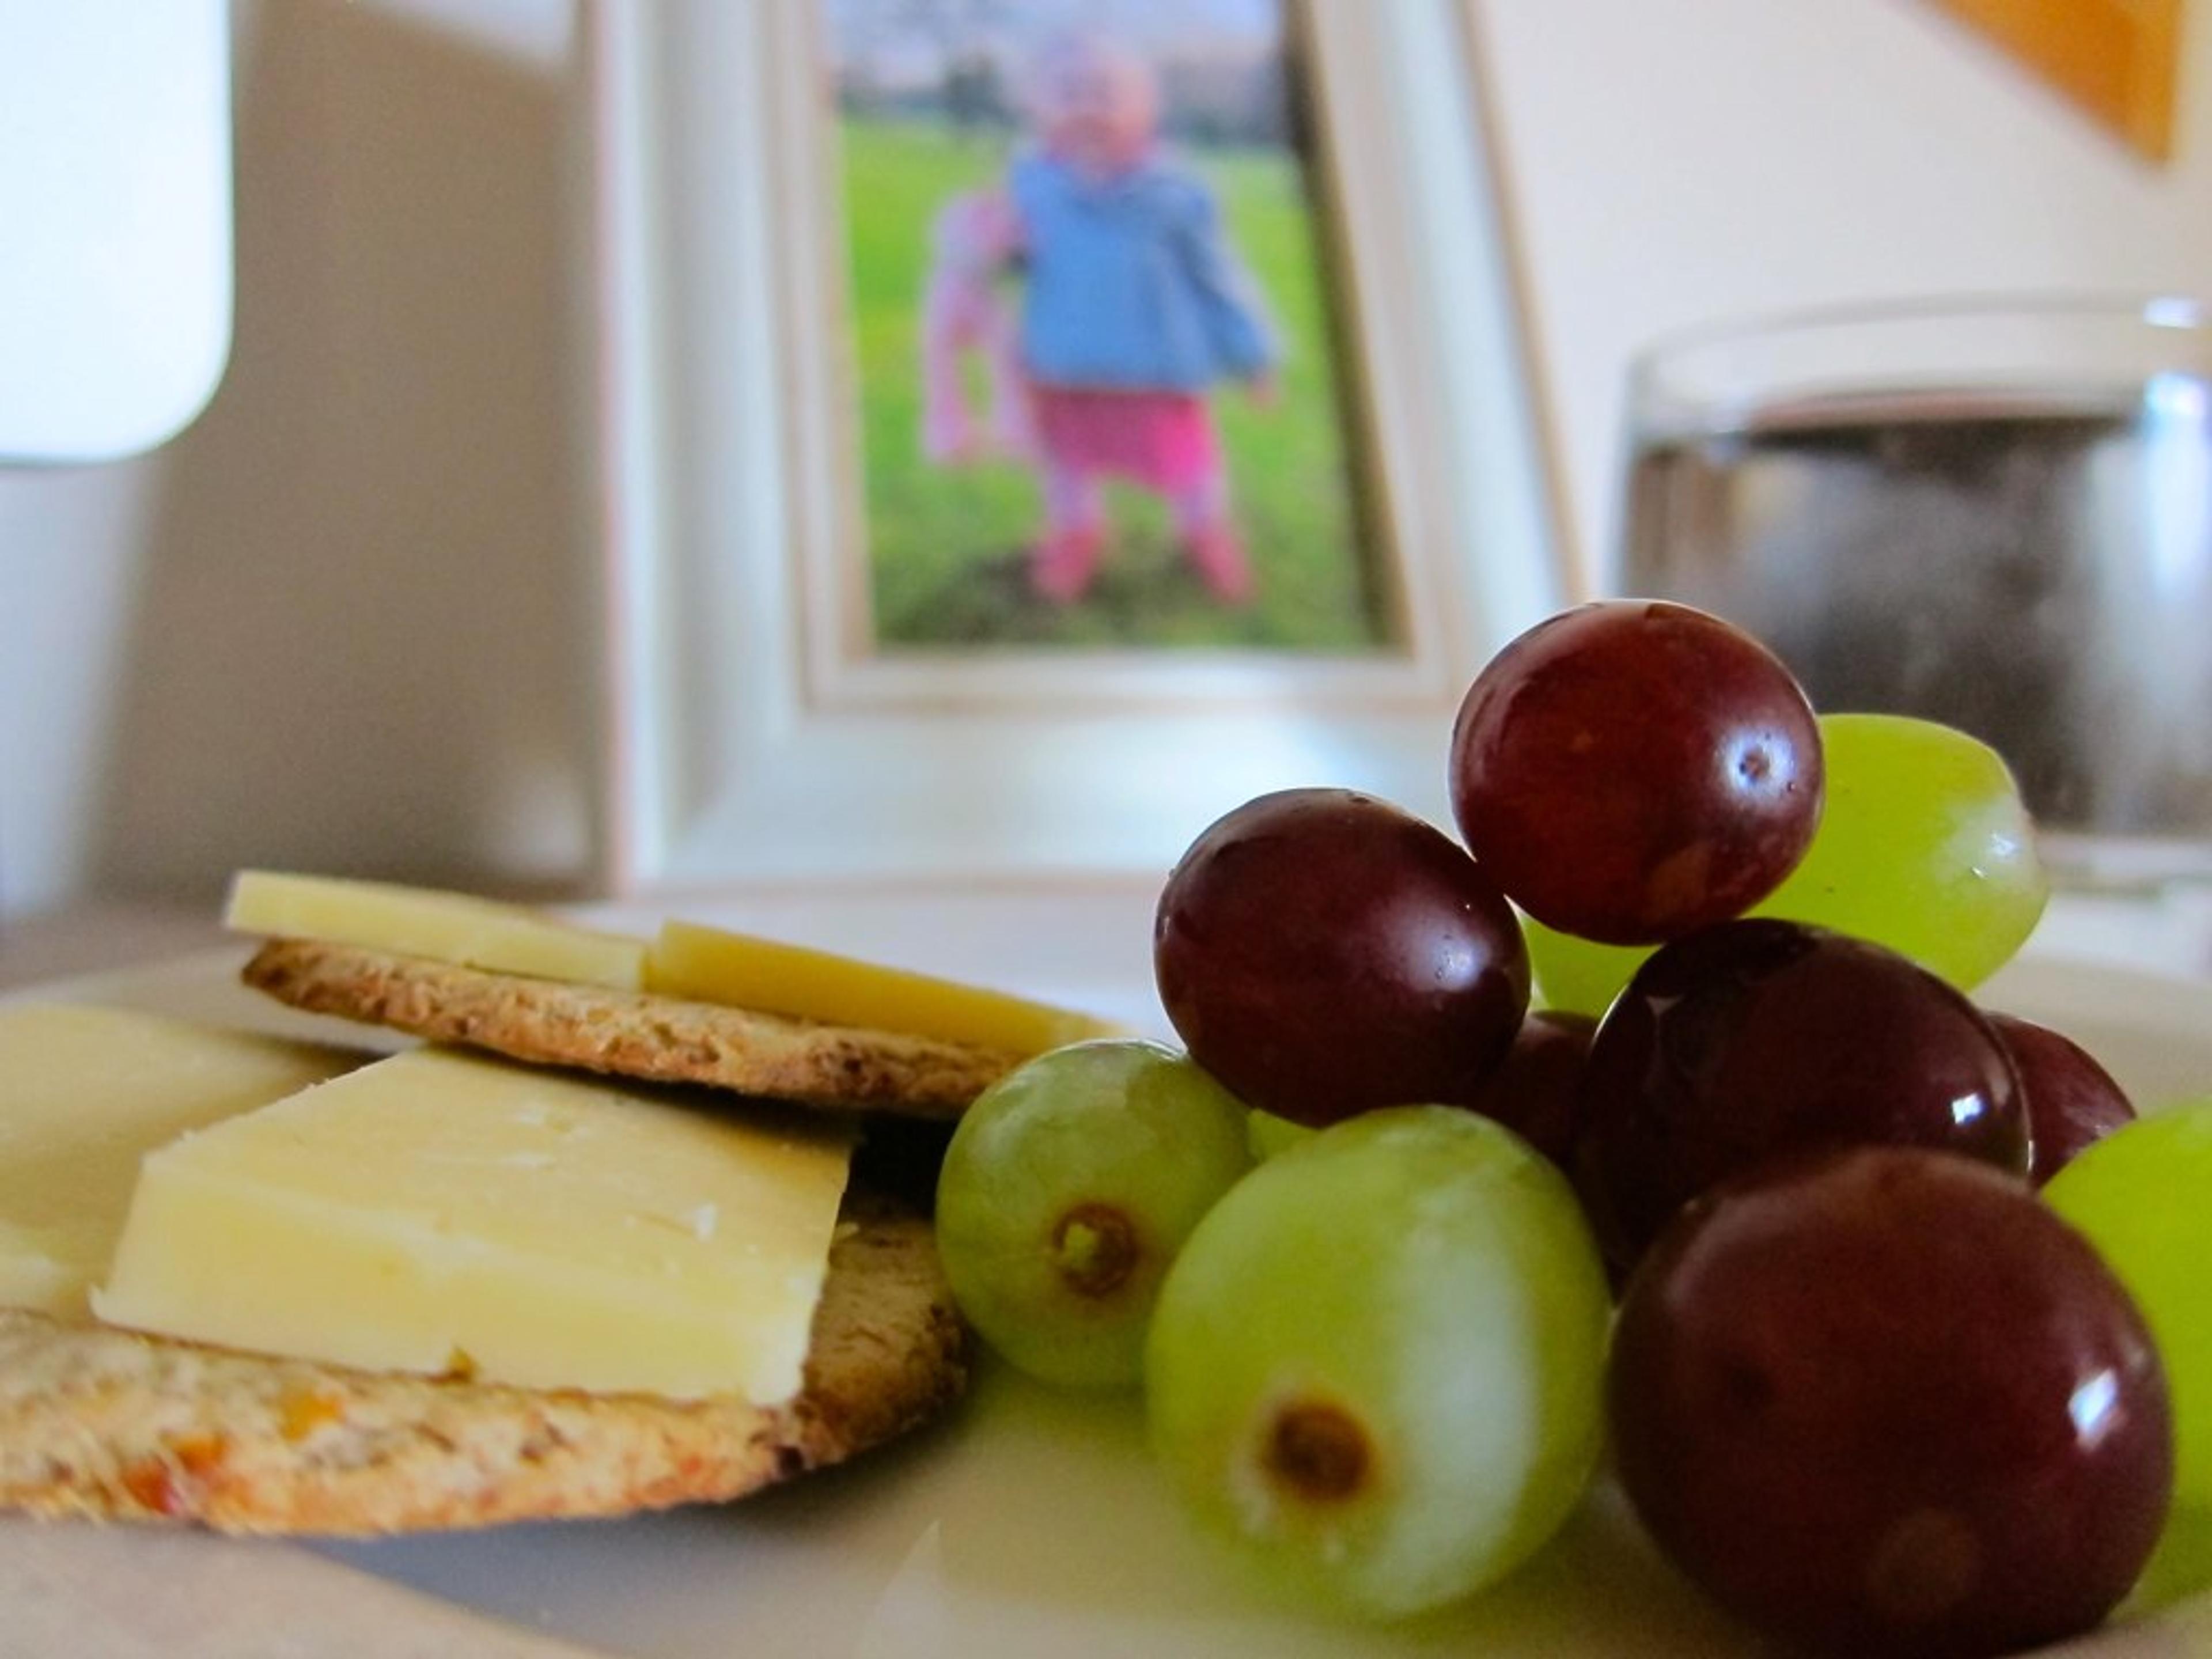 Crackers and Grapes